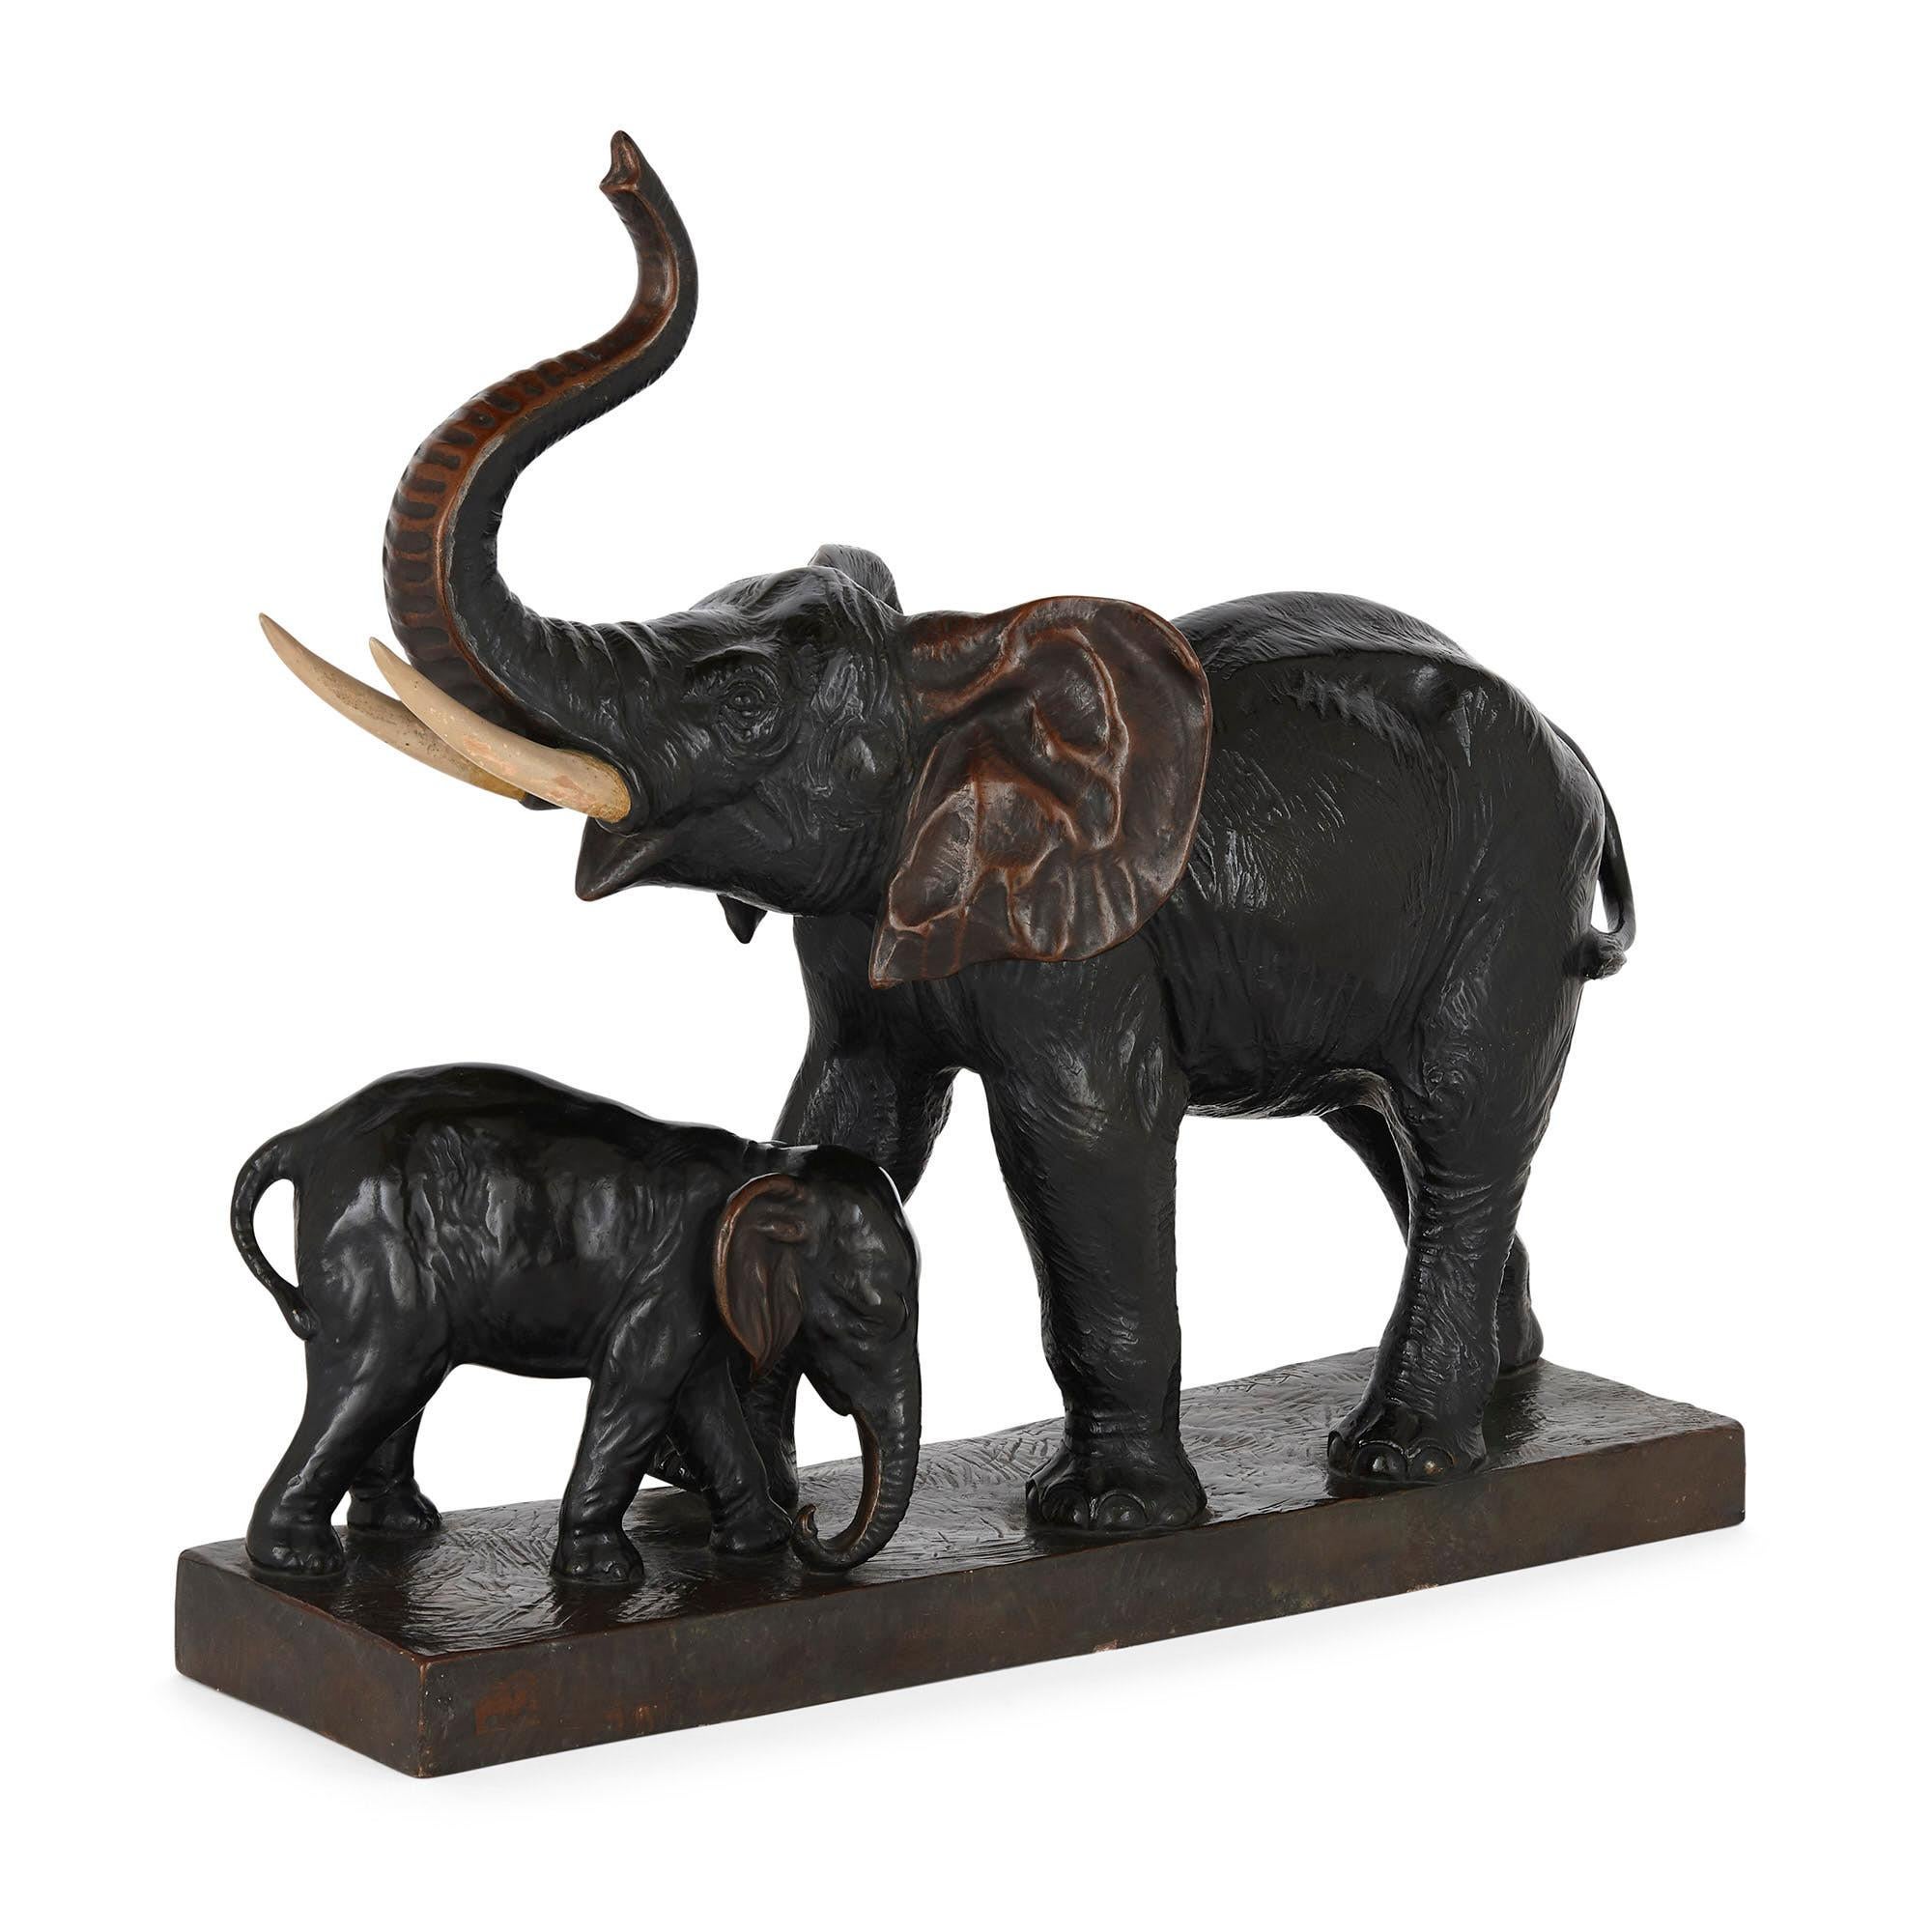 Antique naturalistic terracotta elephant group model
Continental, early 20th century
Dimensions: Height 49cm, width 54cm, depth 18cm

This charming sculptural group, crafted from terracotta, depicts a mother elephant and her calf. They are